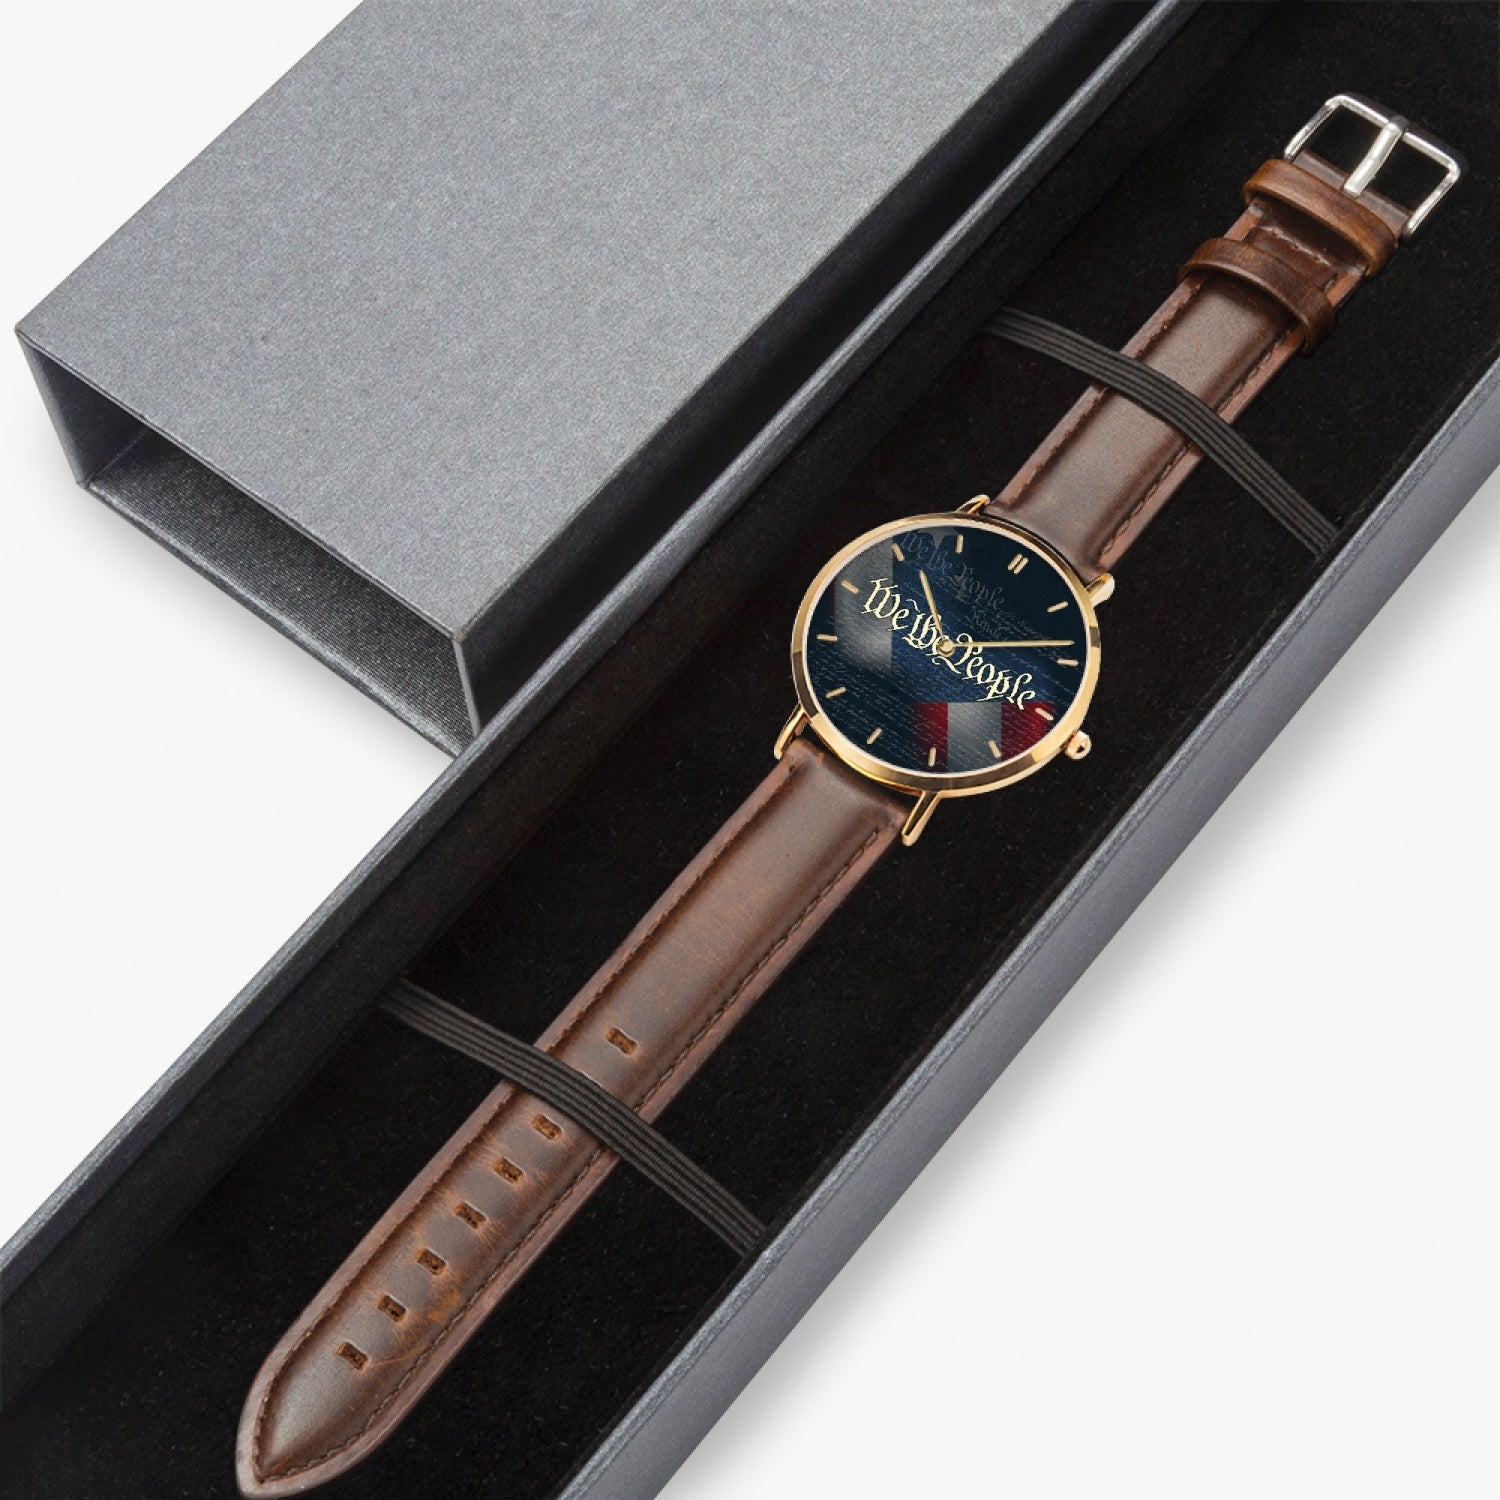 We The People Premium Leather Watch Leather Strap Quartz Watches 